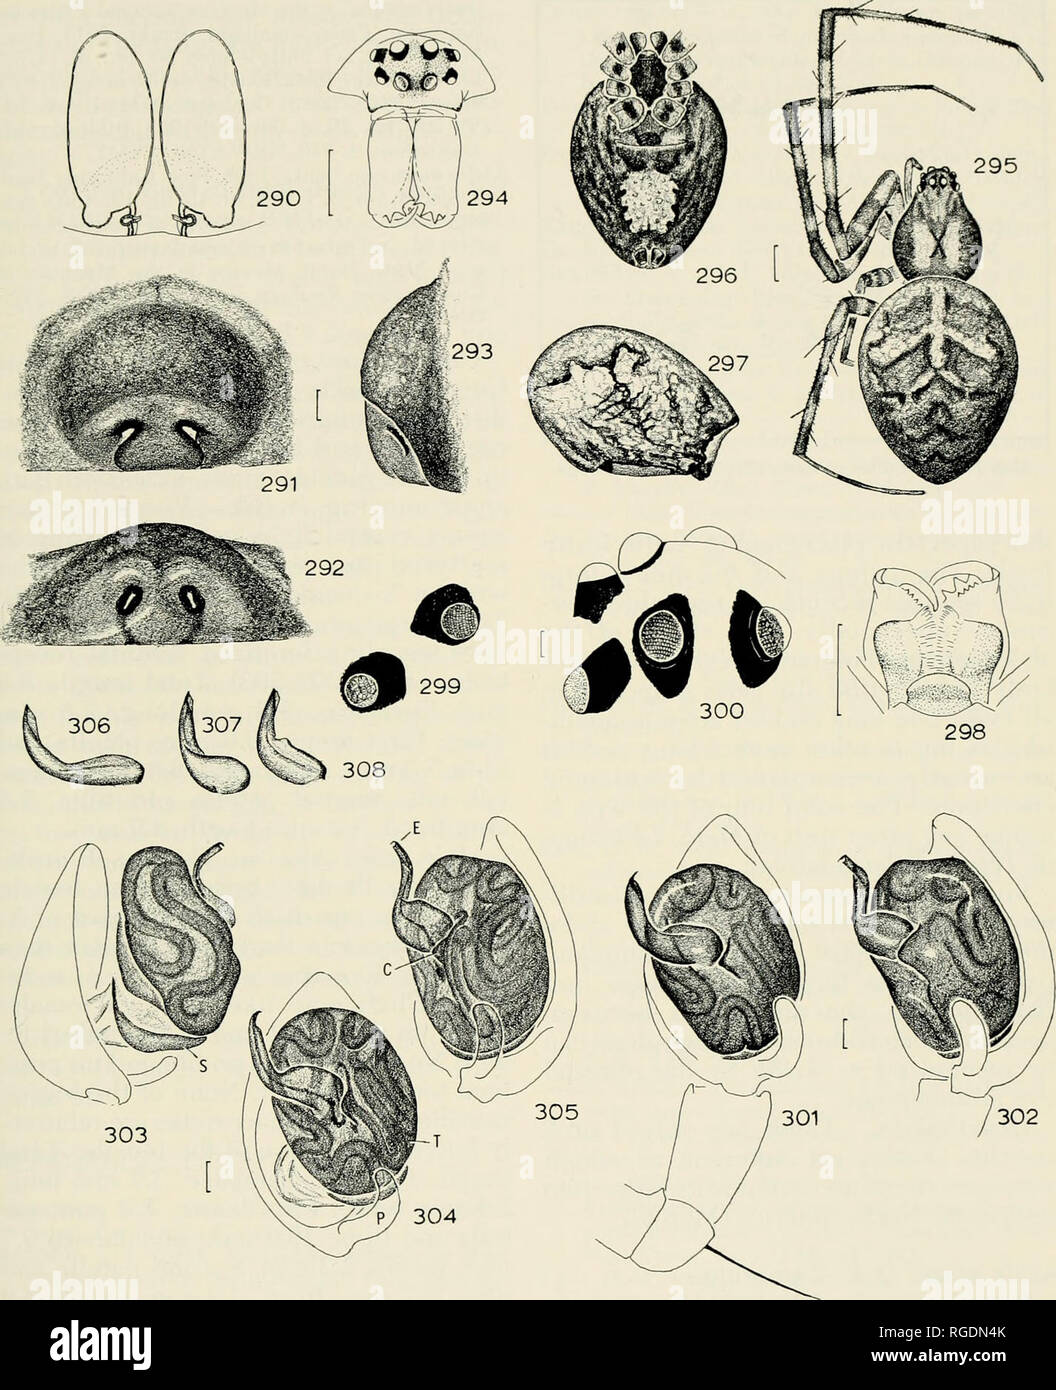 . Bulletin of the Museum of Comparative Zoology at Harvard College. Zoology. Mecynogea, Metinae, Pachygnatha and Azilia North of Mexico • Levi 71. Figures 290-308. Azilia affinis O. P.-Cambridge. 290-300. Female. 290. Female genitalia, dorsal view. 291-293. Epigy- num. 291. Ventral. 292. Posterior. 293. Lateral. 294. Eye region and chelicerae. 295. Female. 296. Abdomen, ventral. 297. Abdomen, lateral. 298. Labium and endites. 299. Left lateral eyes. 300. Posterior median eyes and left laterals. 301-308. Left male palpus. 301. Ventral. 302. Lateral. 303-305. Expanded and cleared. 303. Mesal. 30 Stock Photo